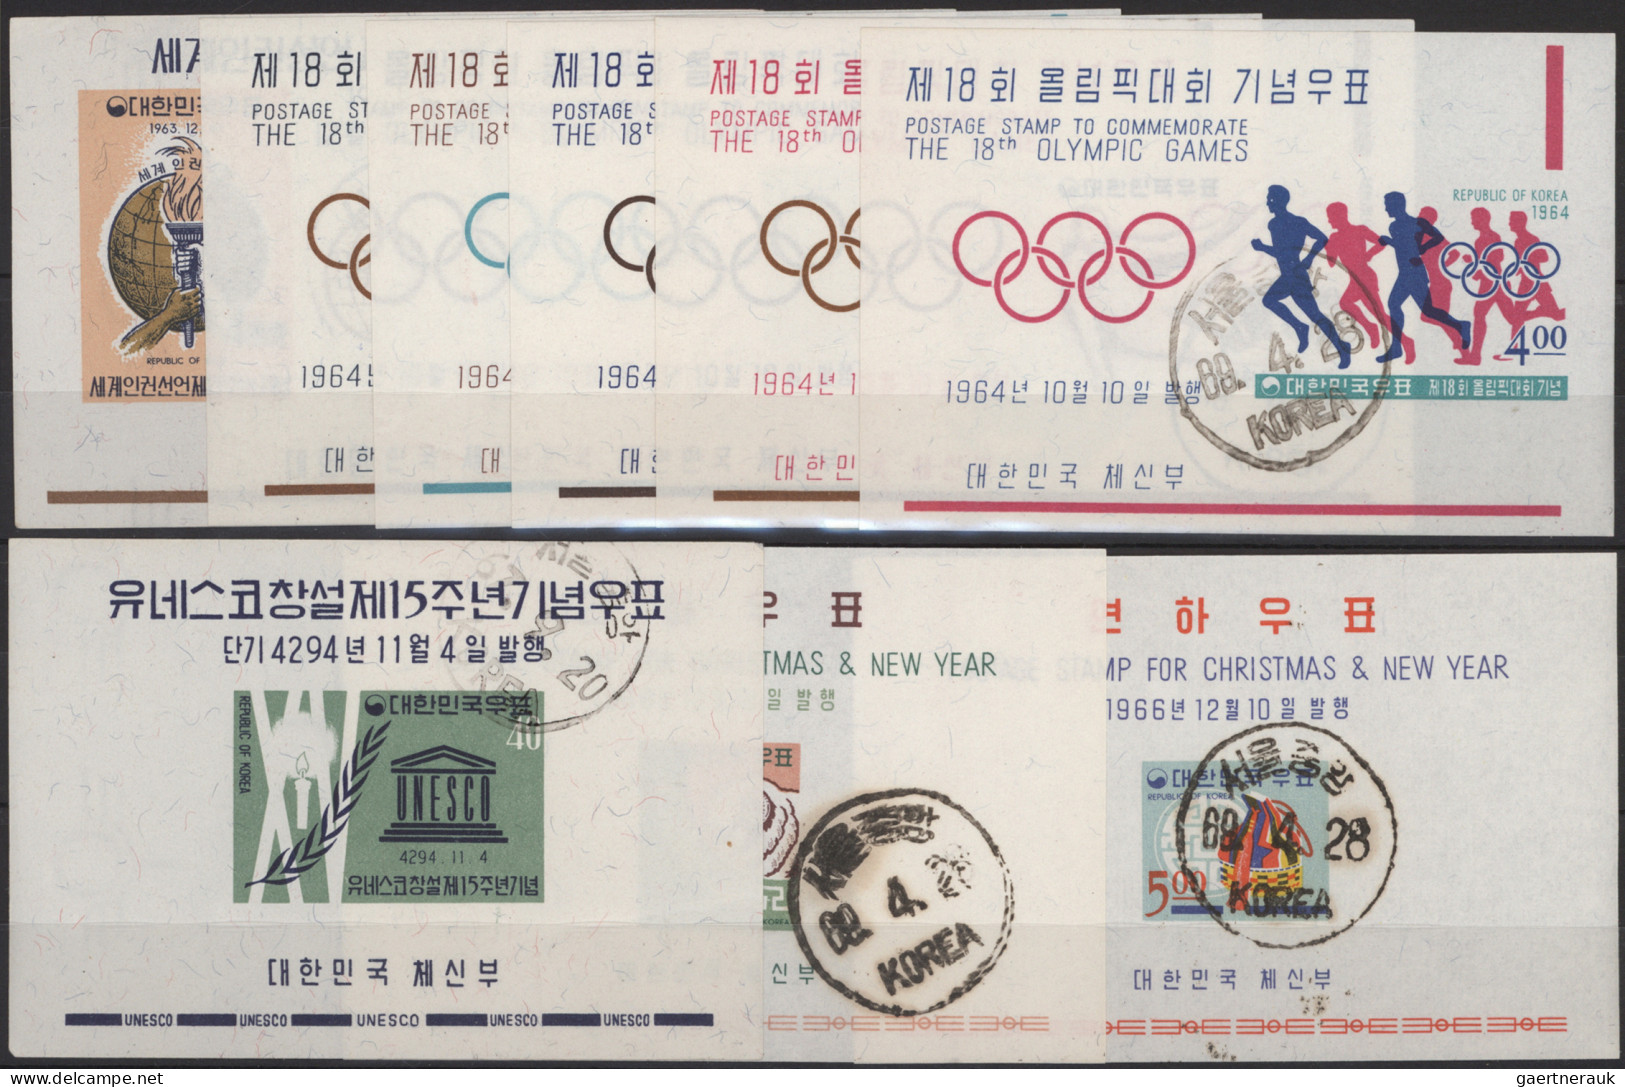 Korea: 1884/2008, mint and mainly used on large stockcards, pages and in envelop